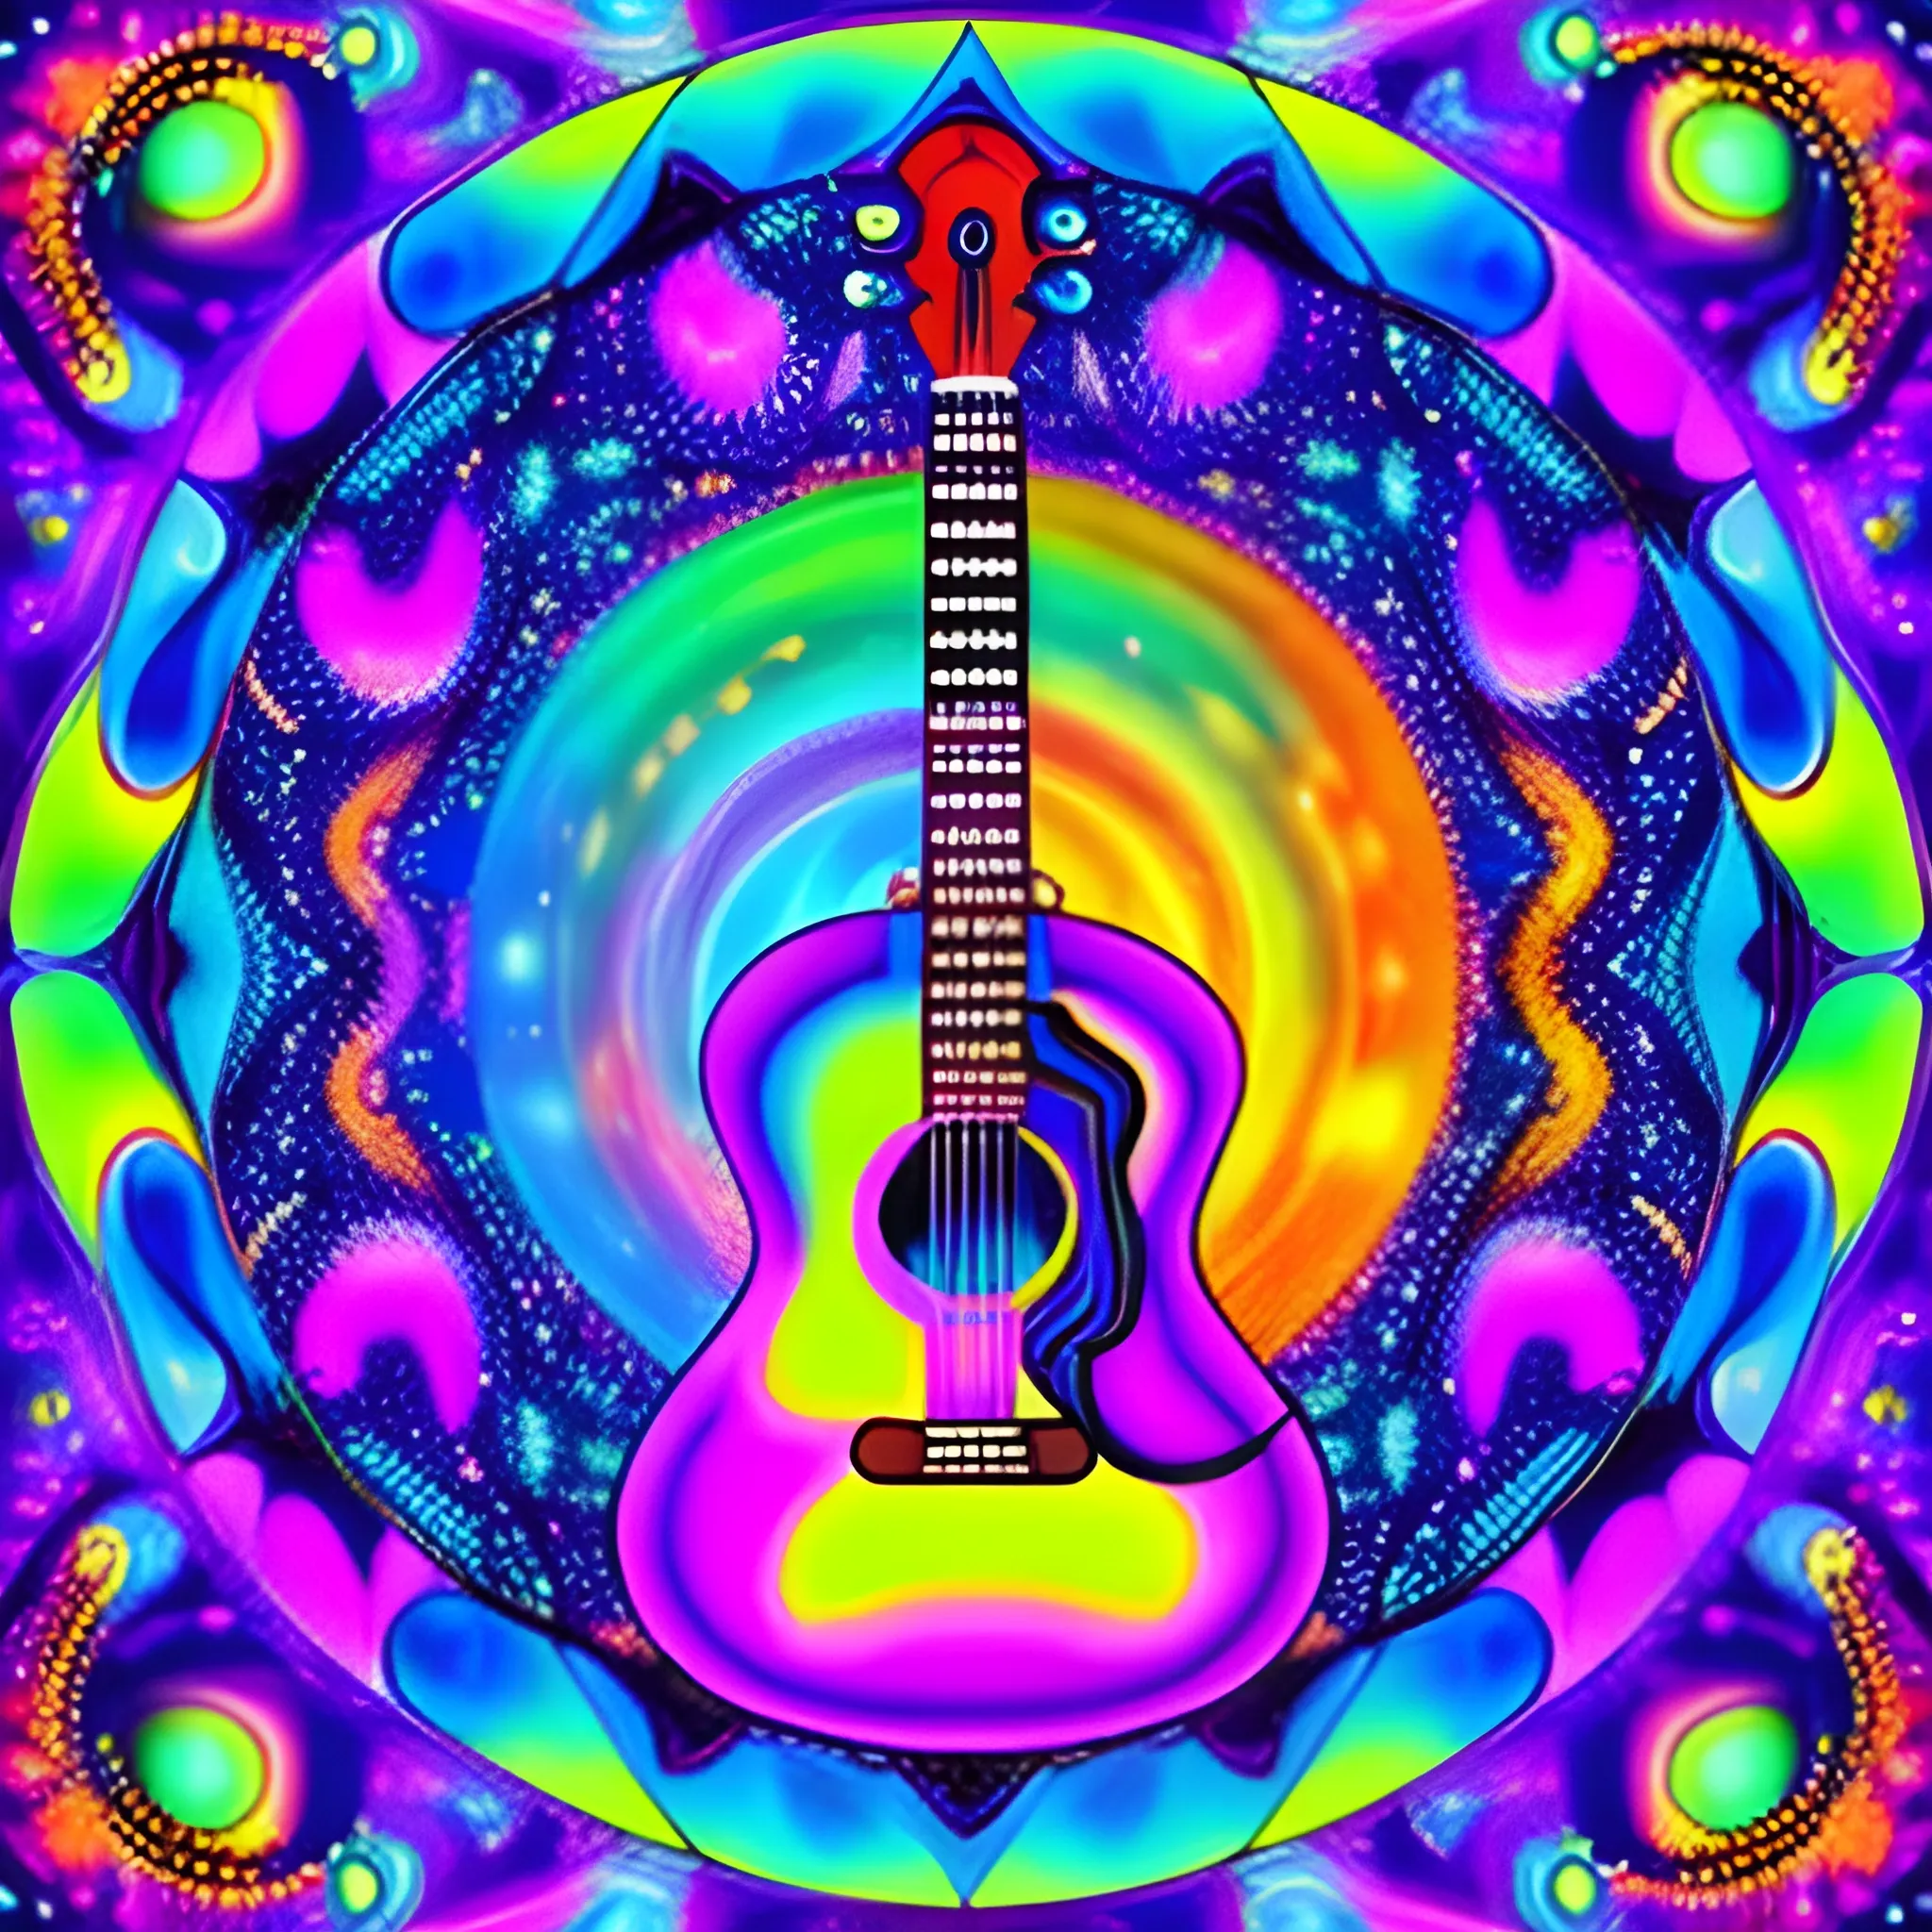 Trippy, serenity
, music, colorful, universe
